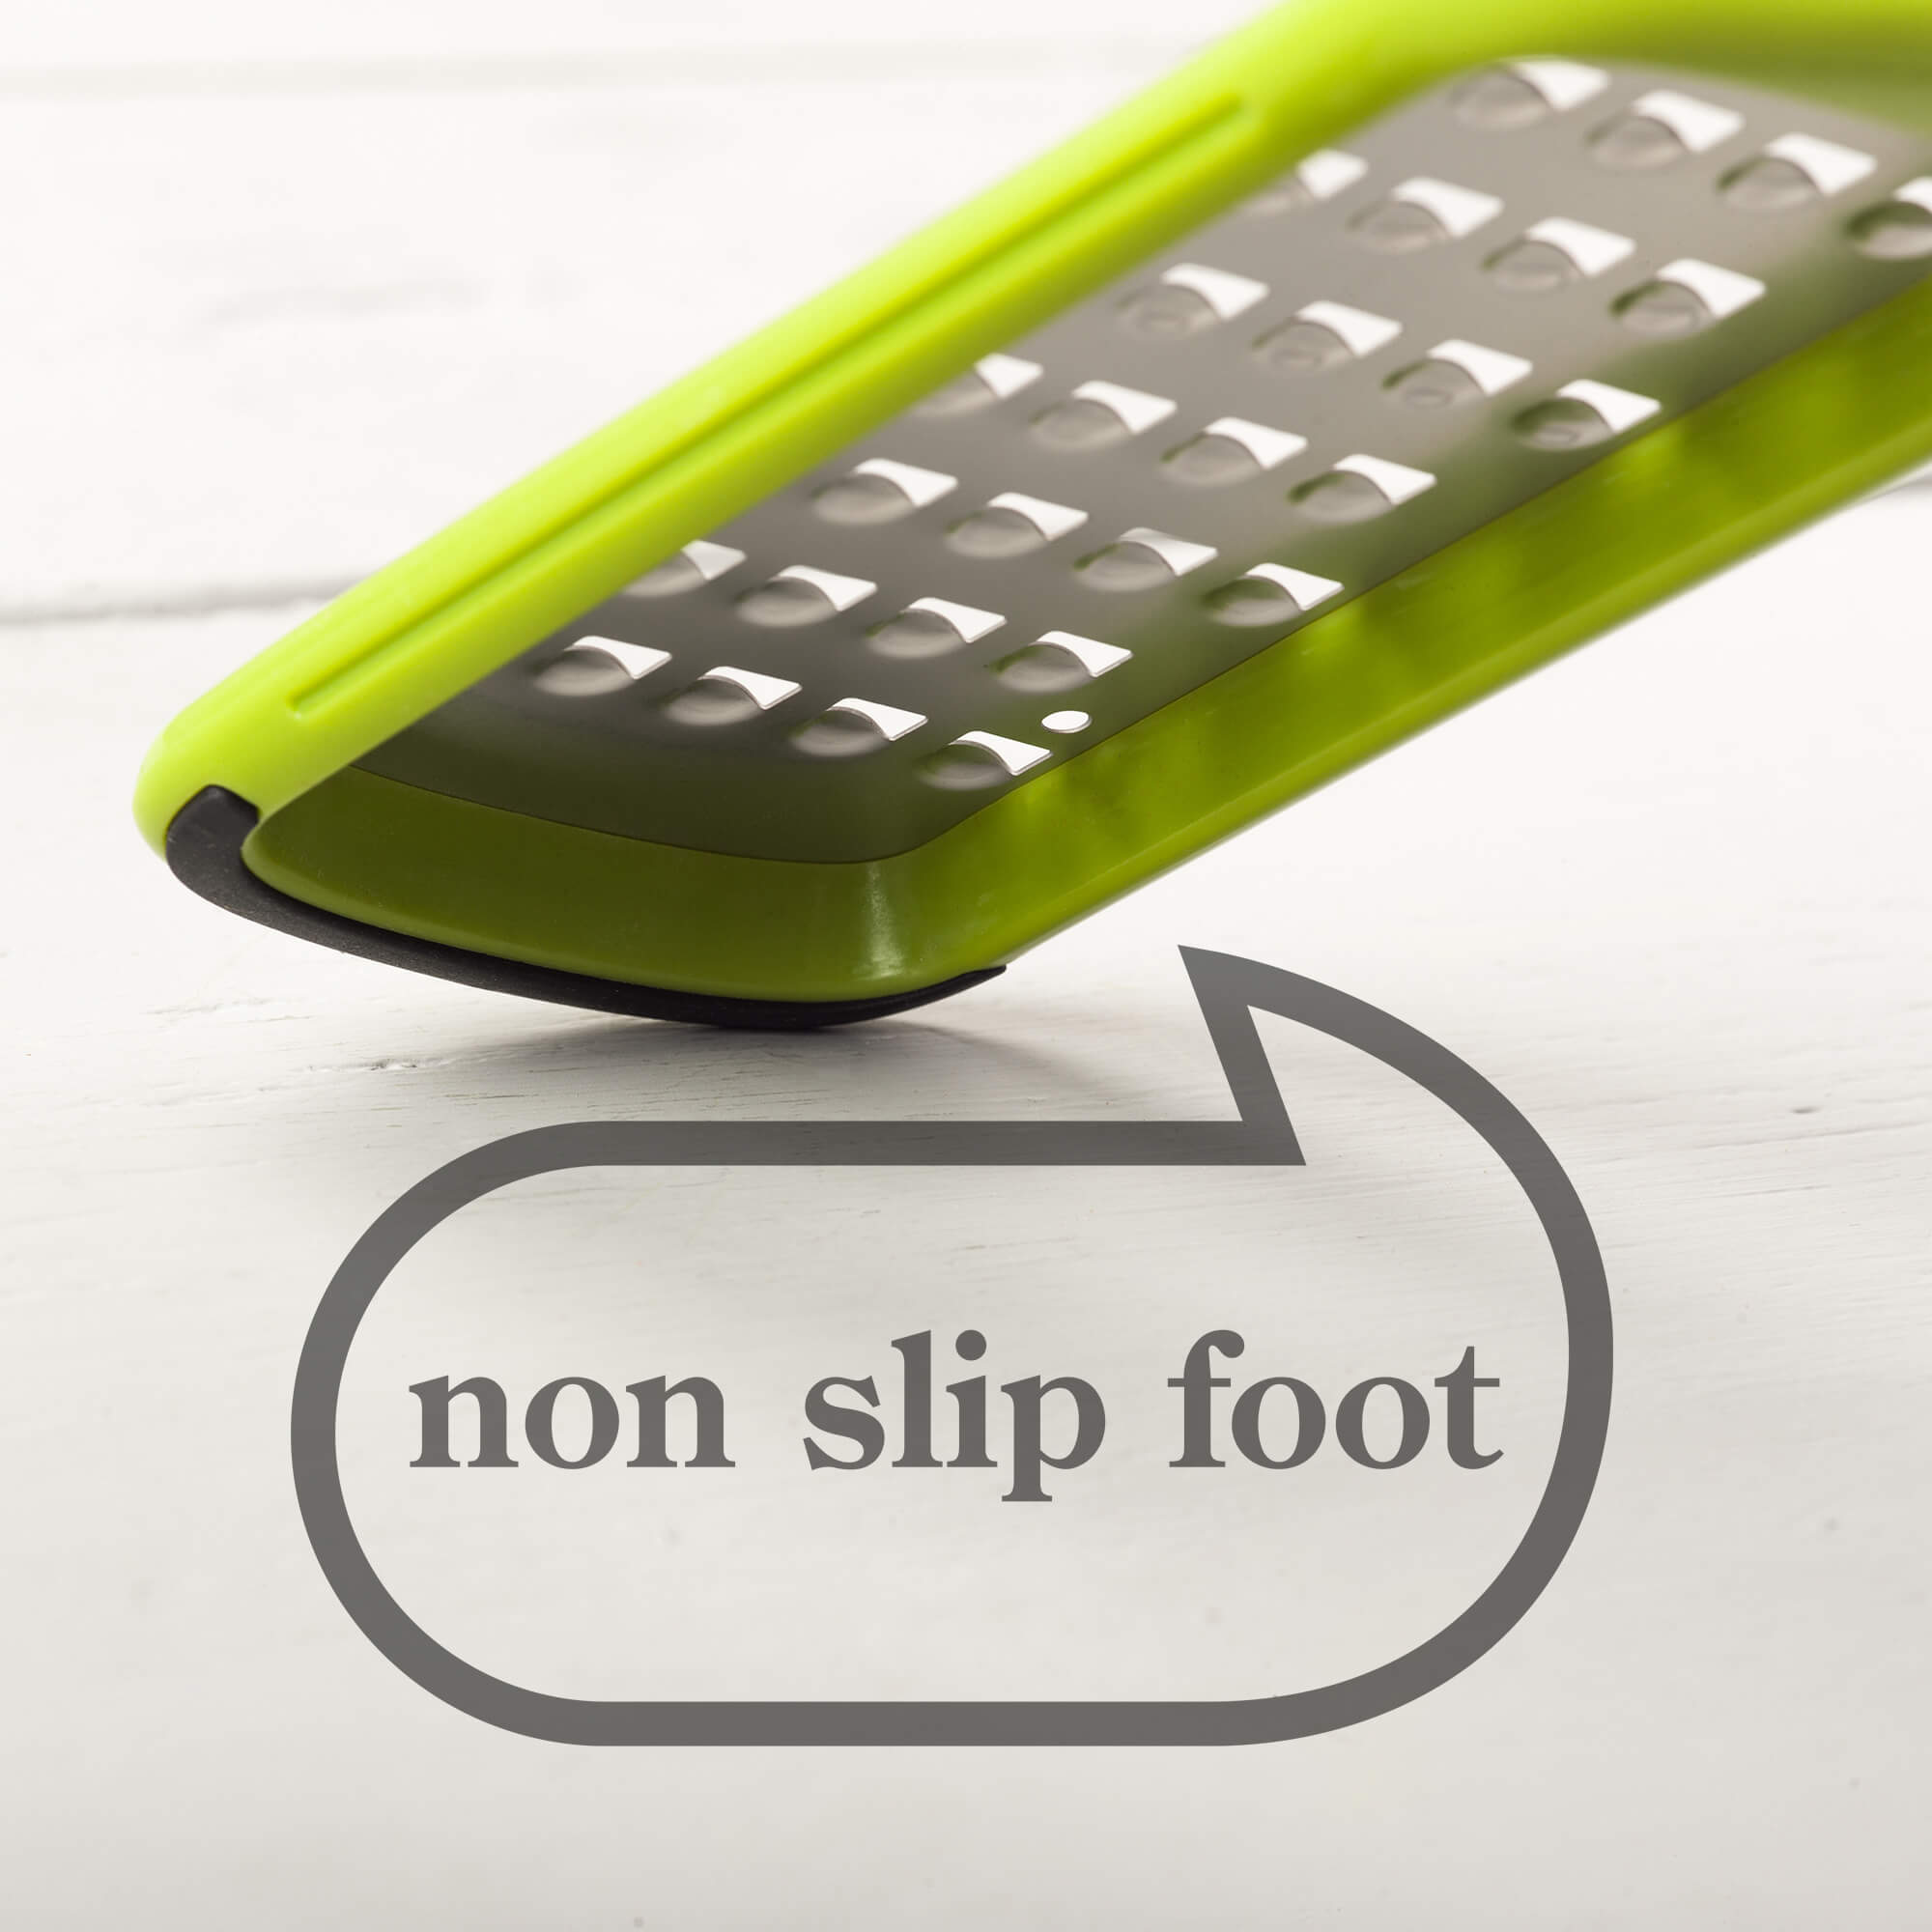 Zeal Coarse Grater with non slip foot